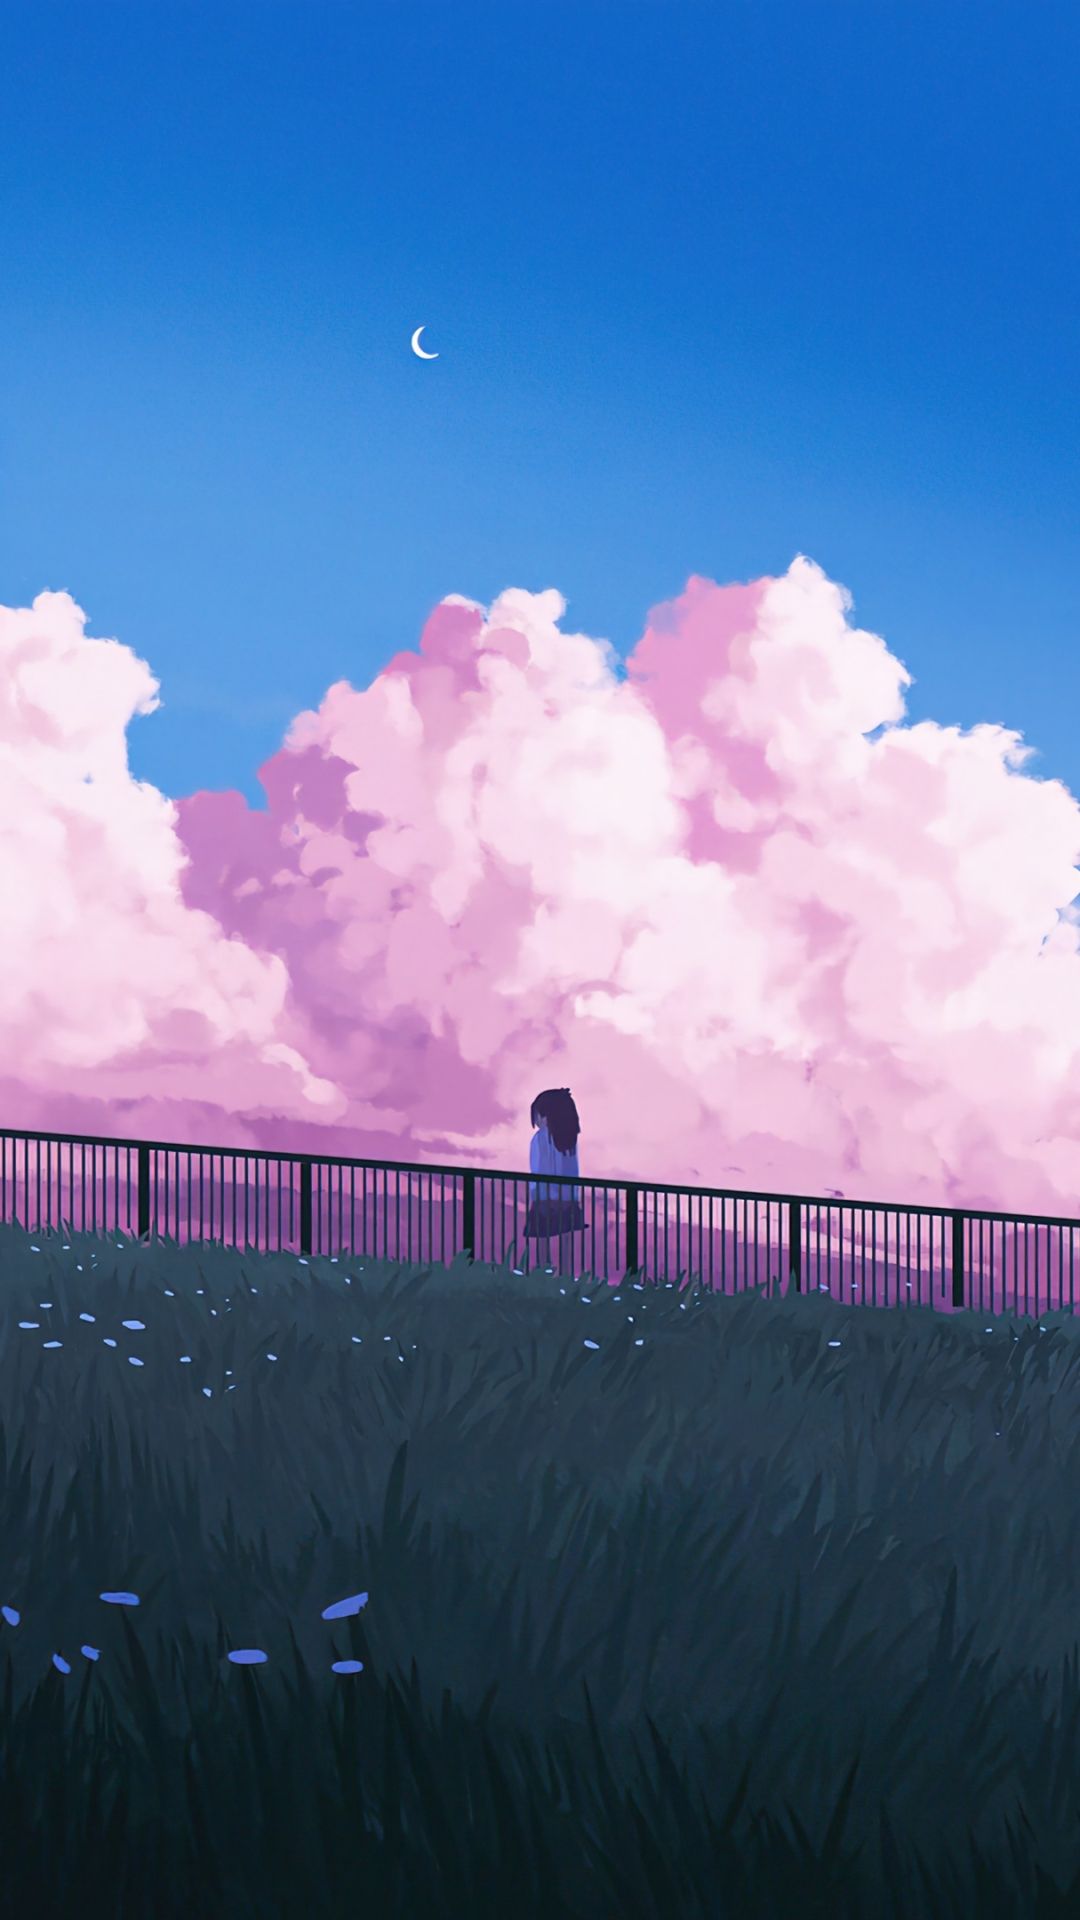 A person sitting on the grass looking at clouds - Anime landscape